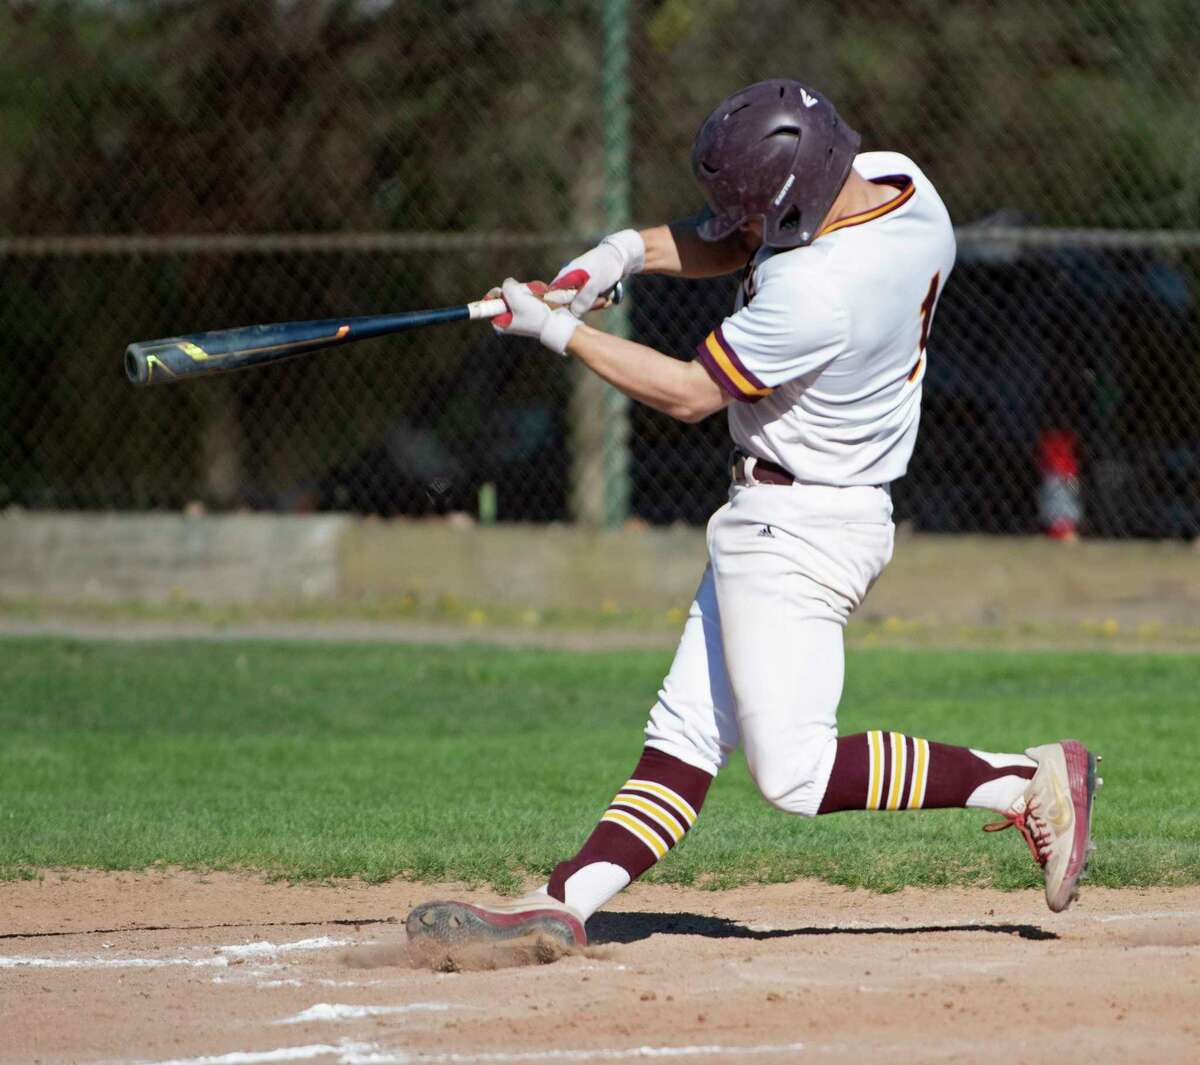 Colonie pitcher Tyler Sausville hits a home run during a baseball game against Averill Park at Cook Park on Monday, May 9, 2022 in Colonie, N.Y.